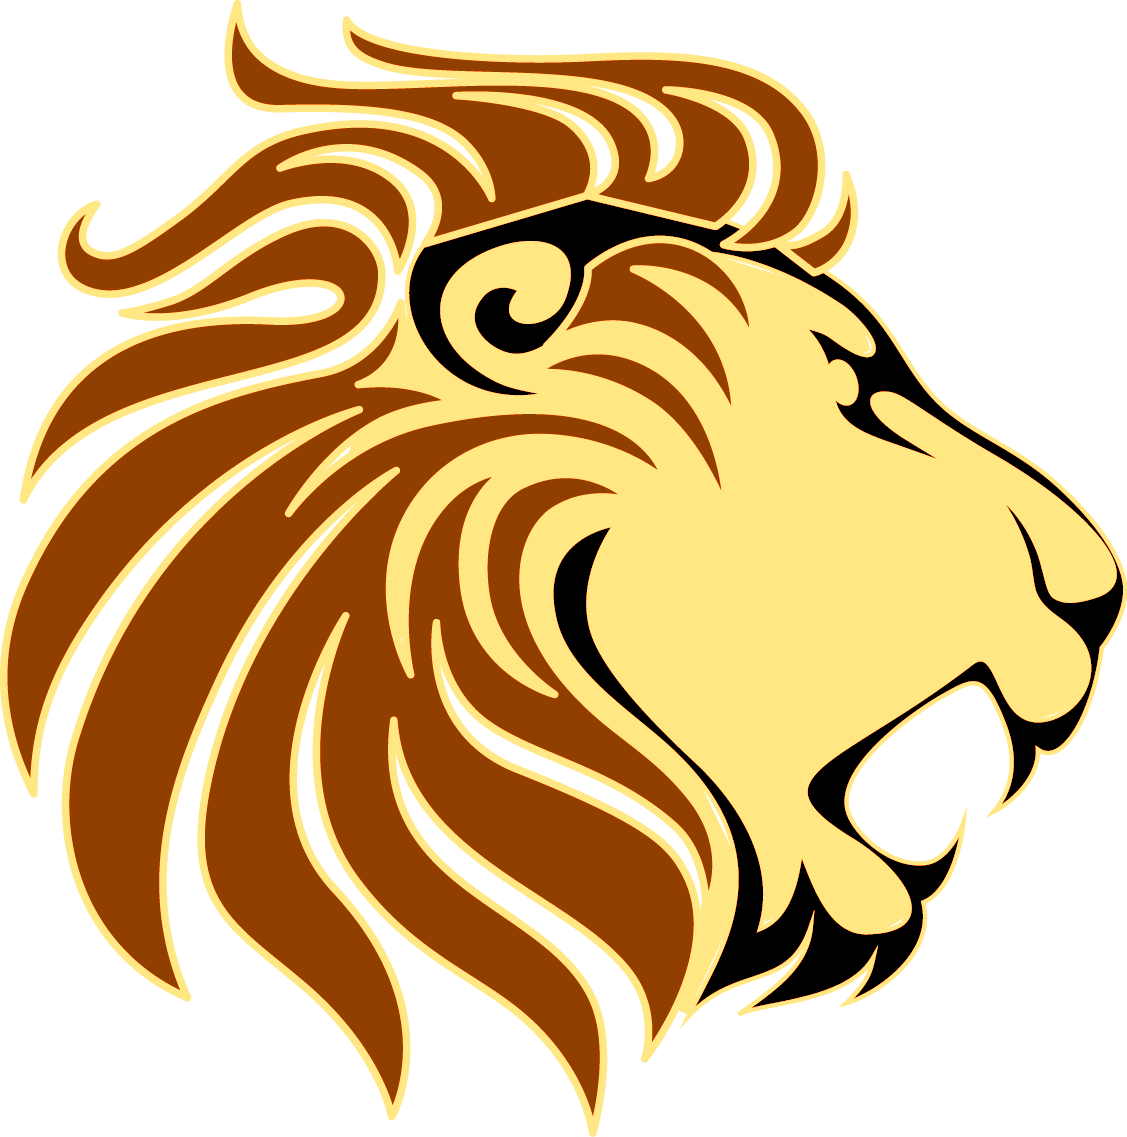 Lions are used to. Lion clipart courageous